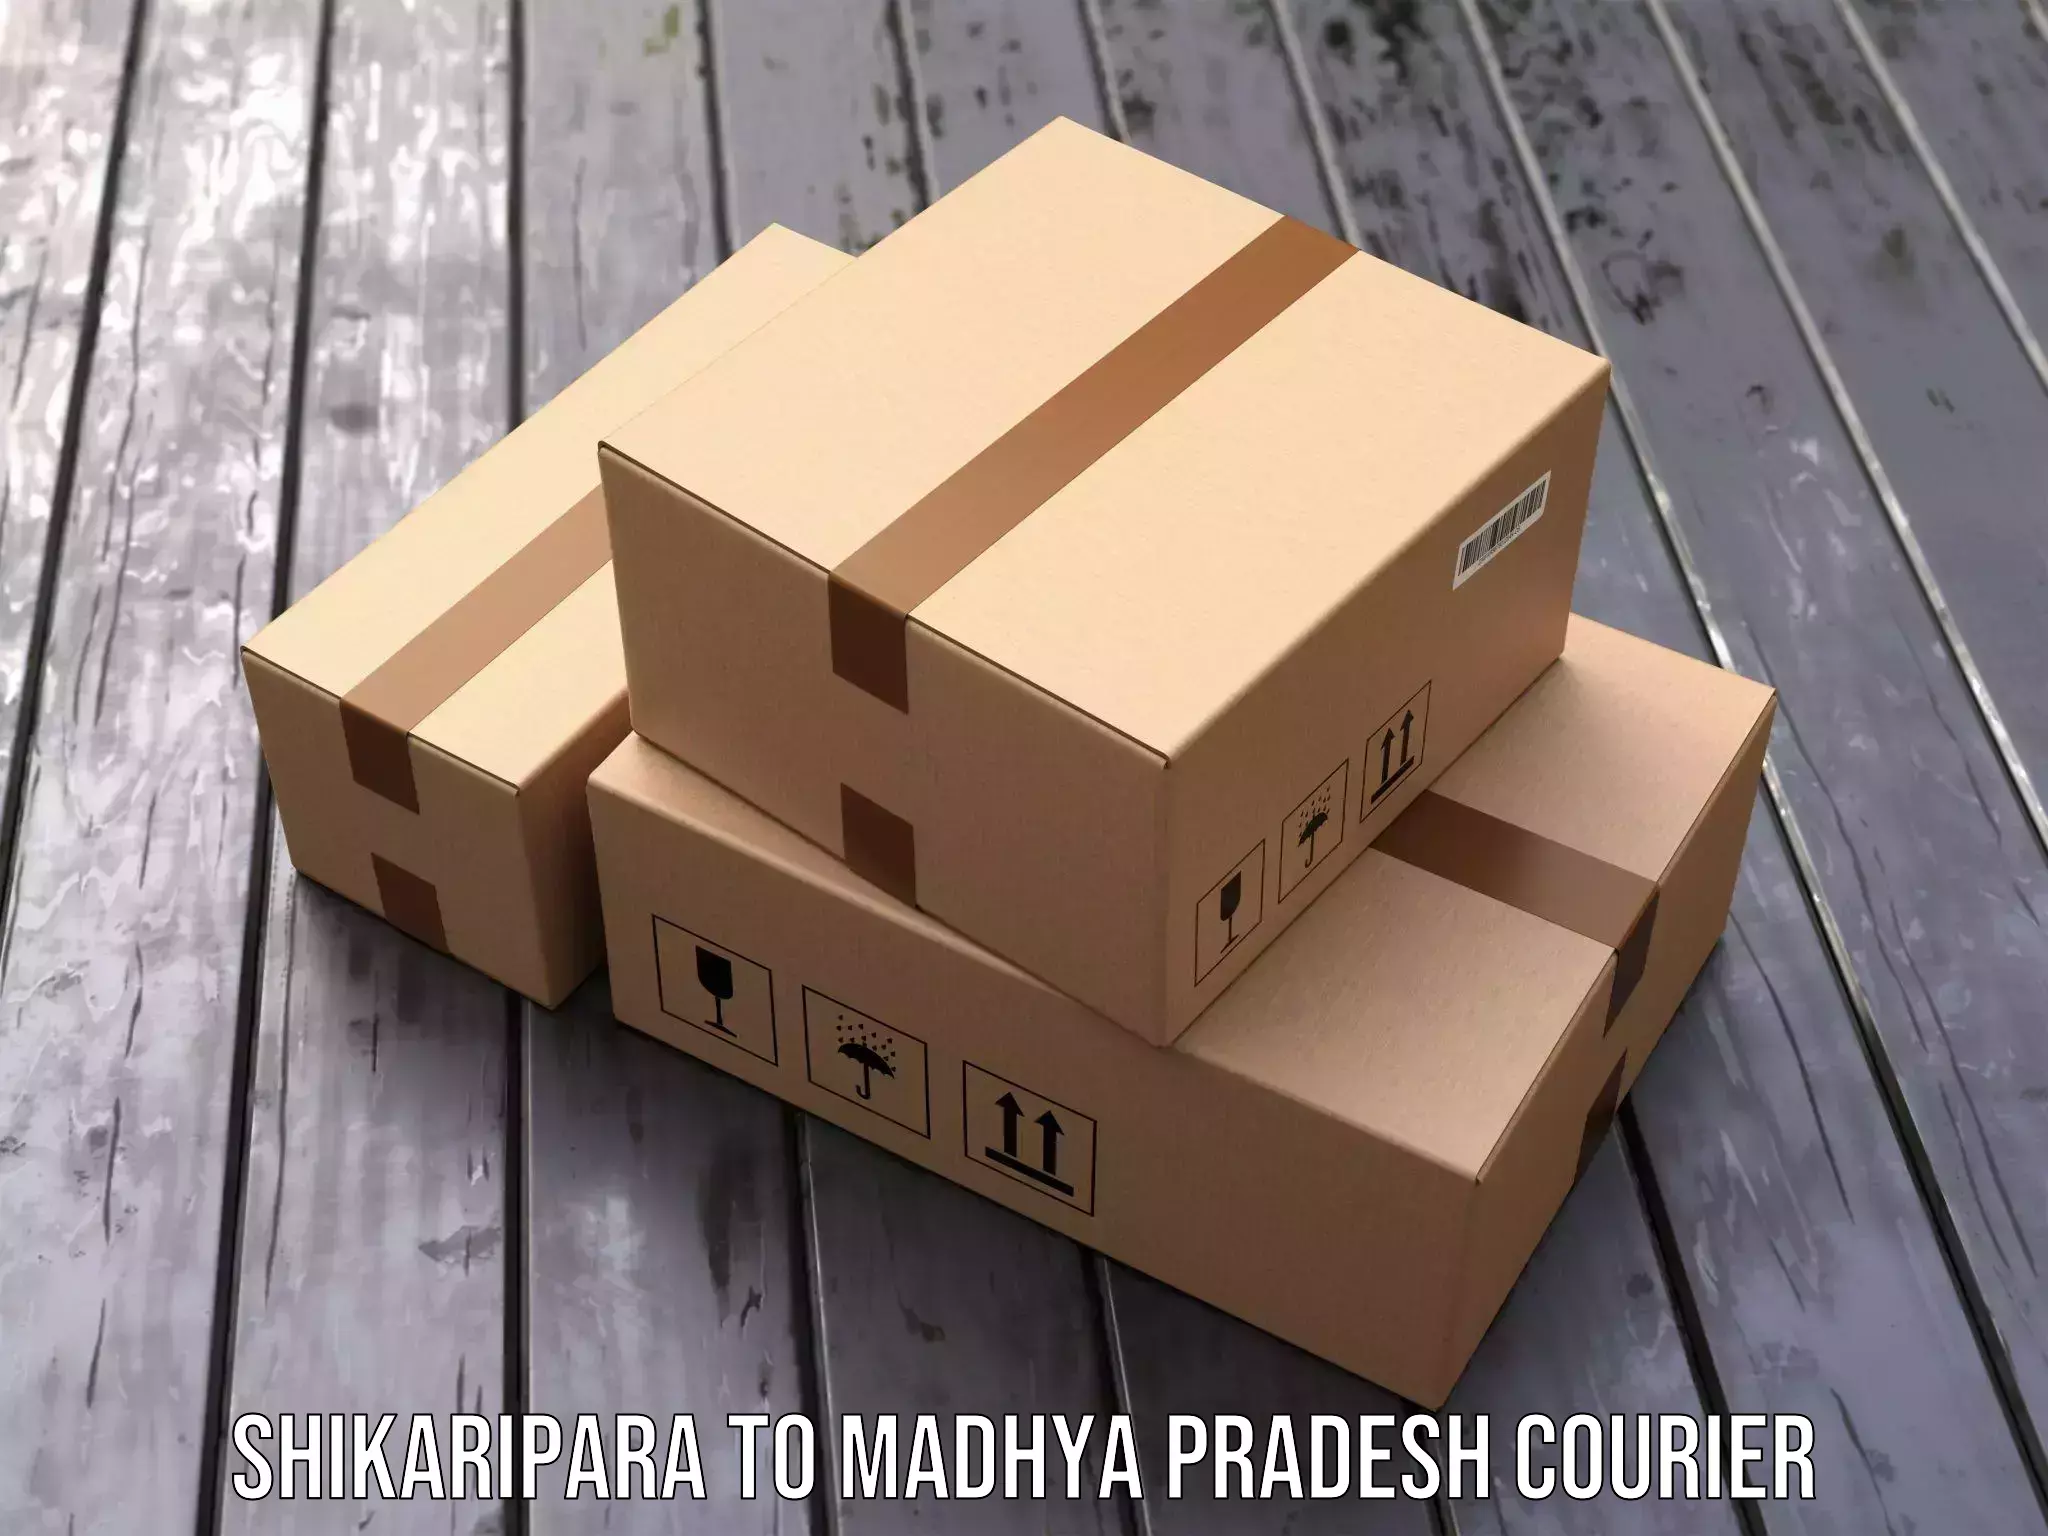 High-quality delivery services Shikaripara to Nalkheda